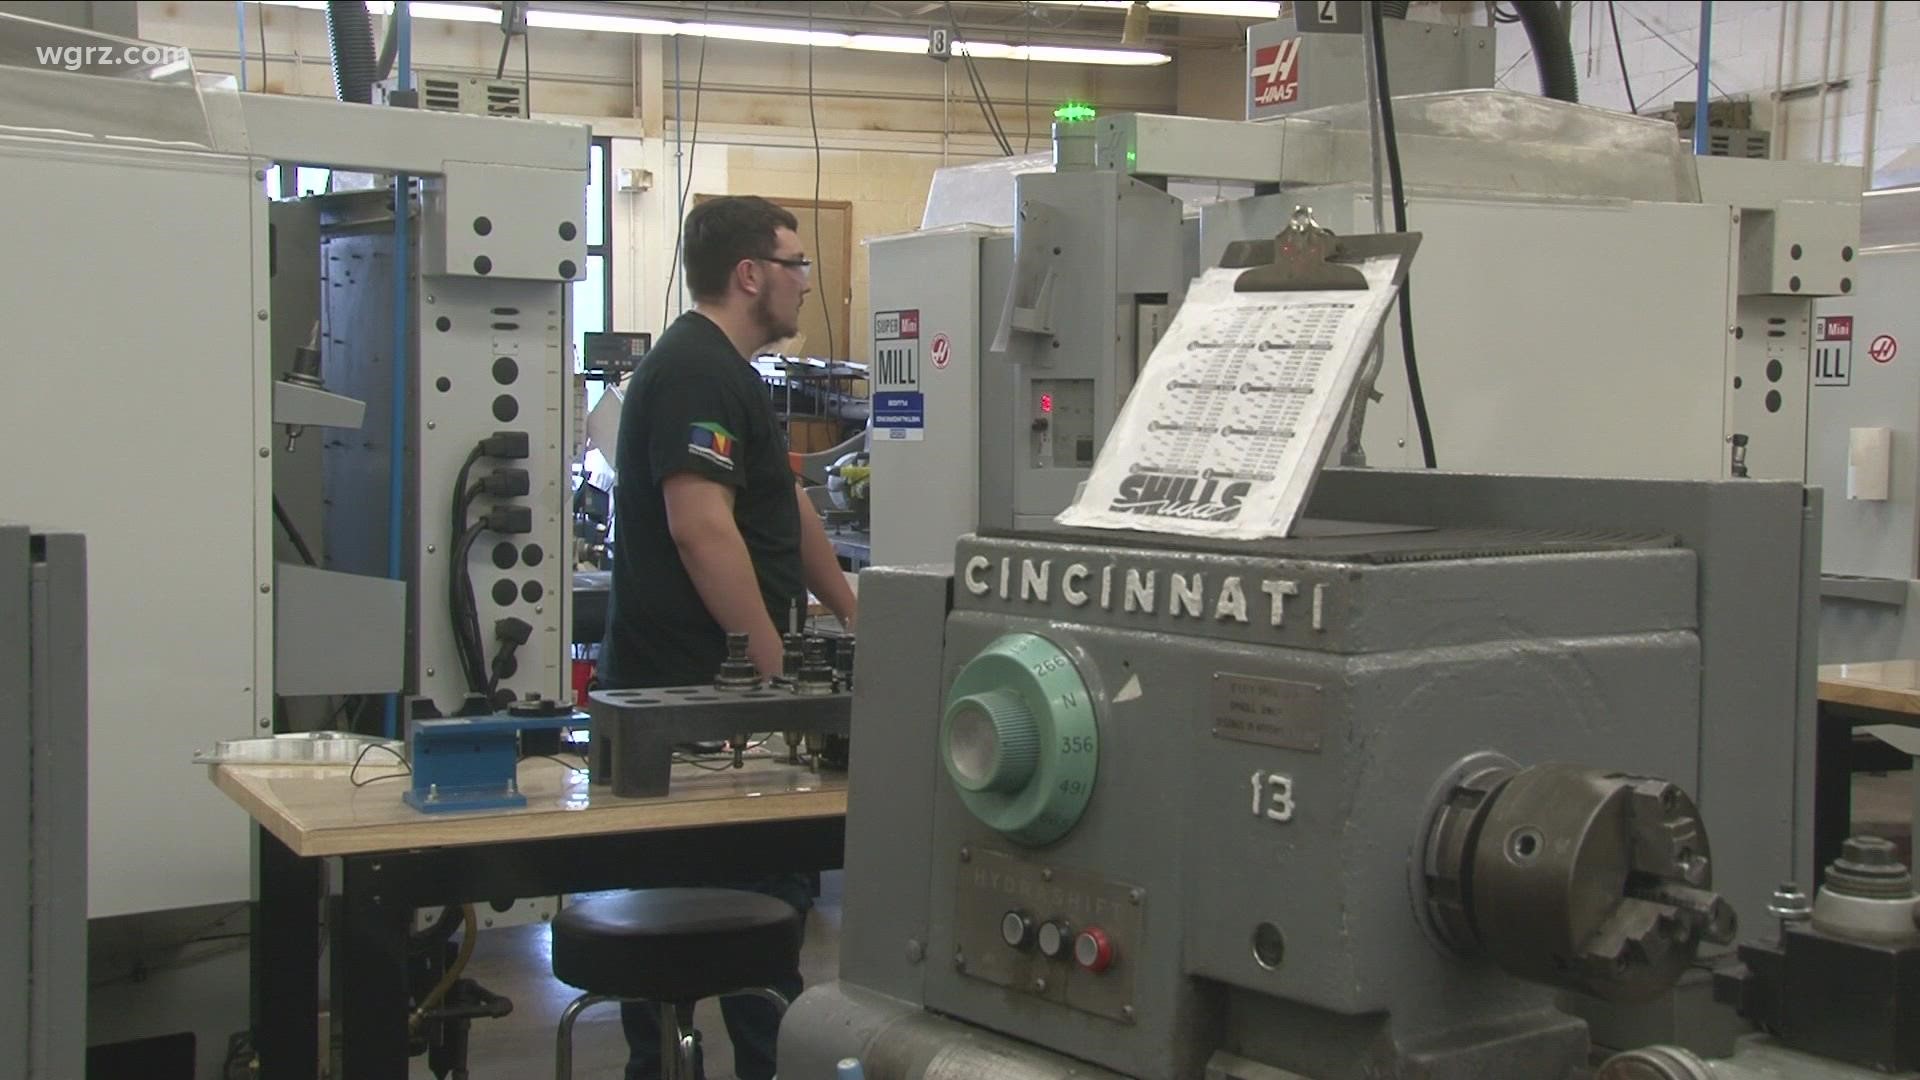 A growing curriculum at BOCES is paving the way for the next generation of skilled workers in the manufacturing field.